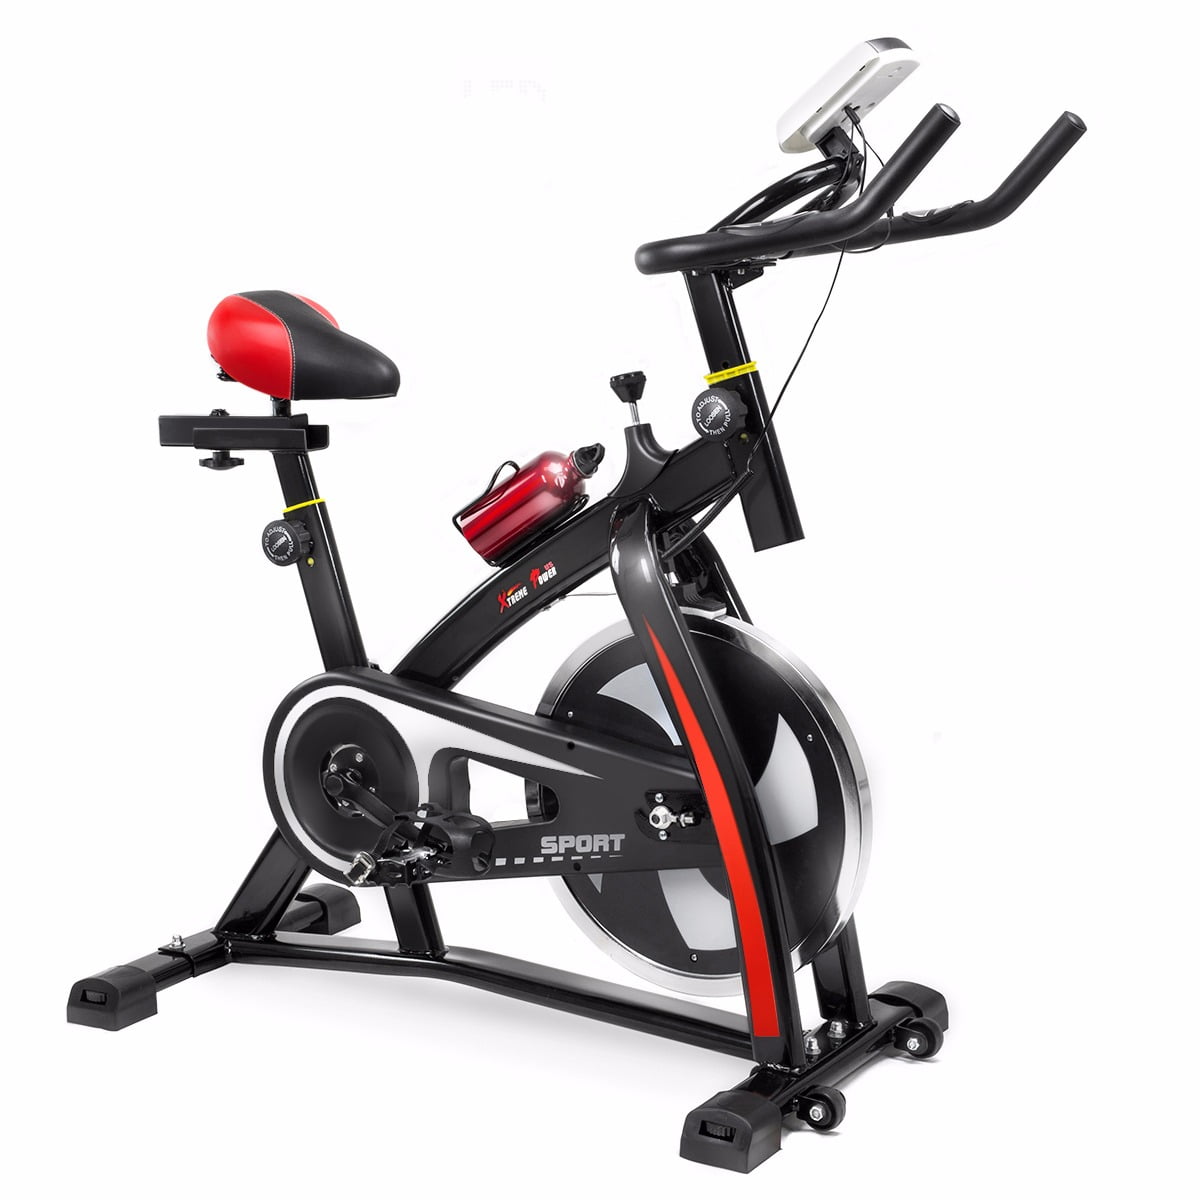 Details about   Exercise Bicycle Cycling Fitness Stationary Bike Cardio Home Indoor 2colors 